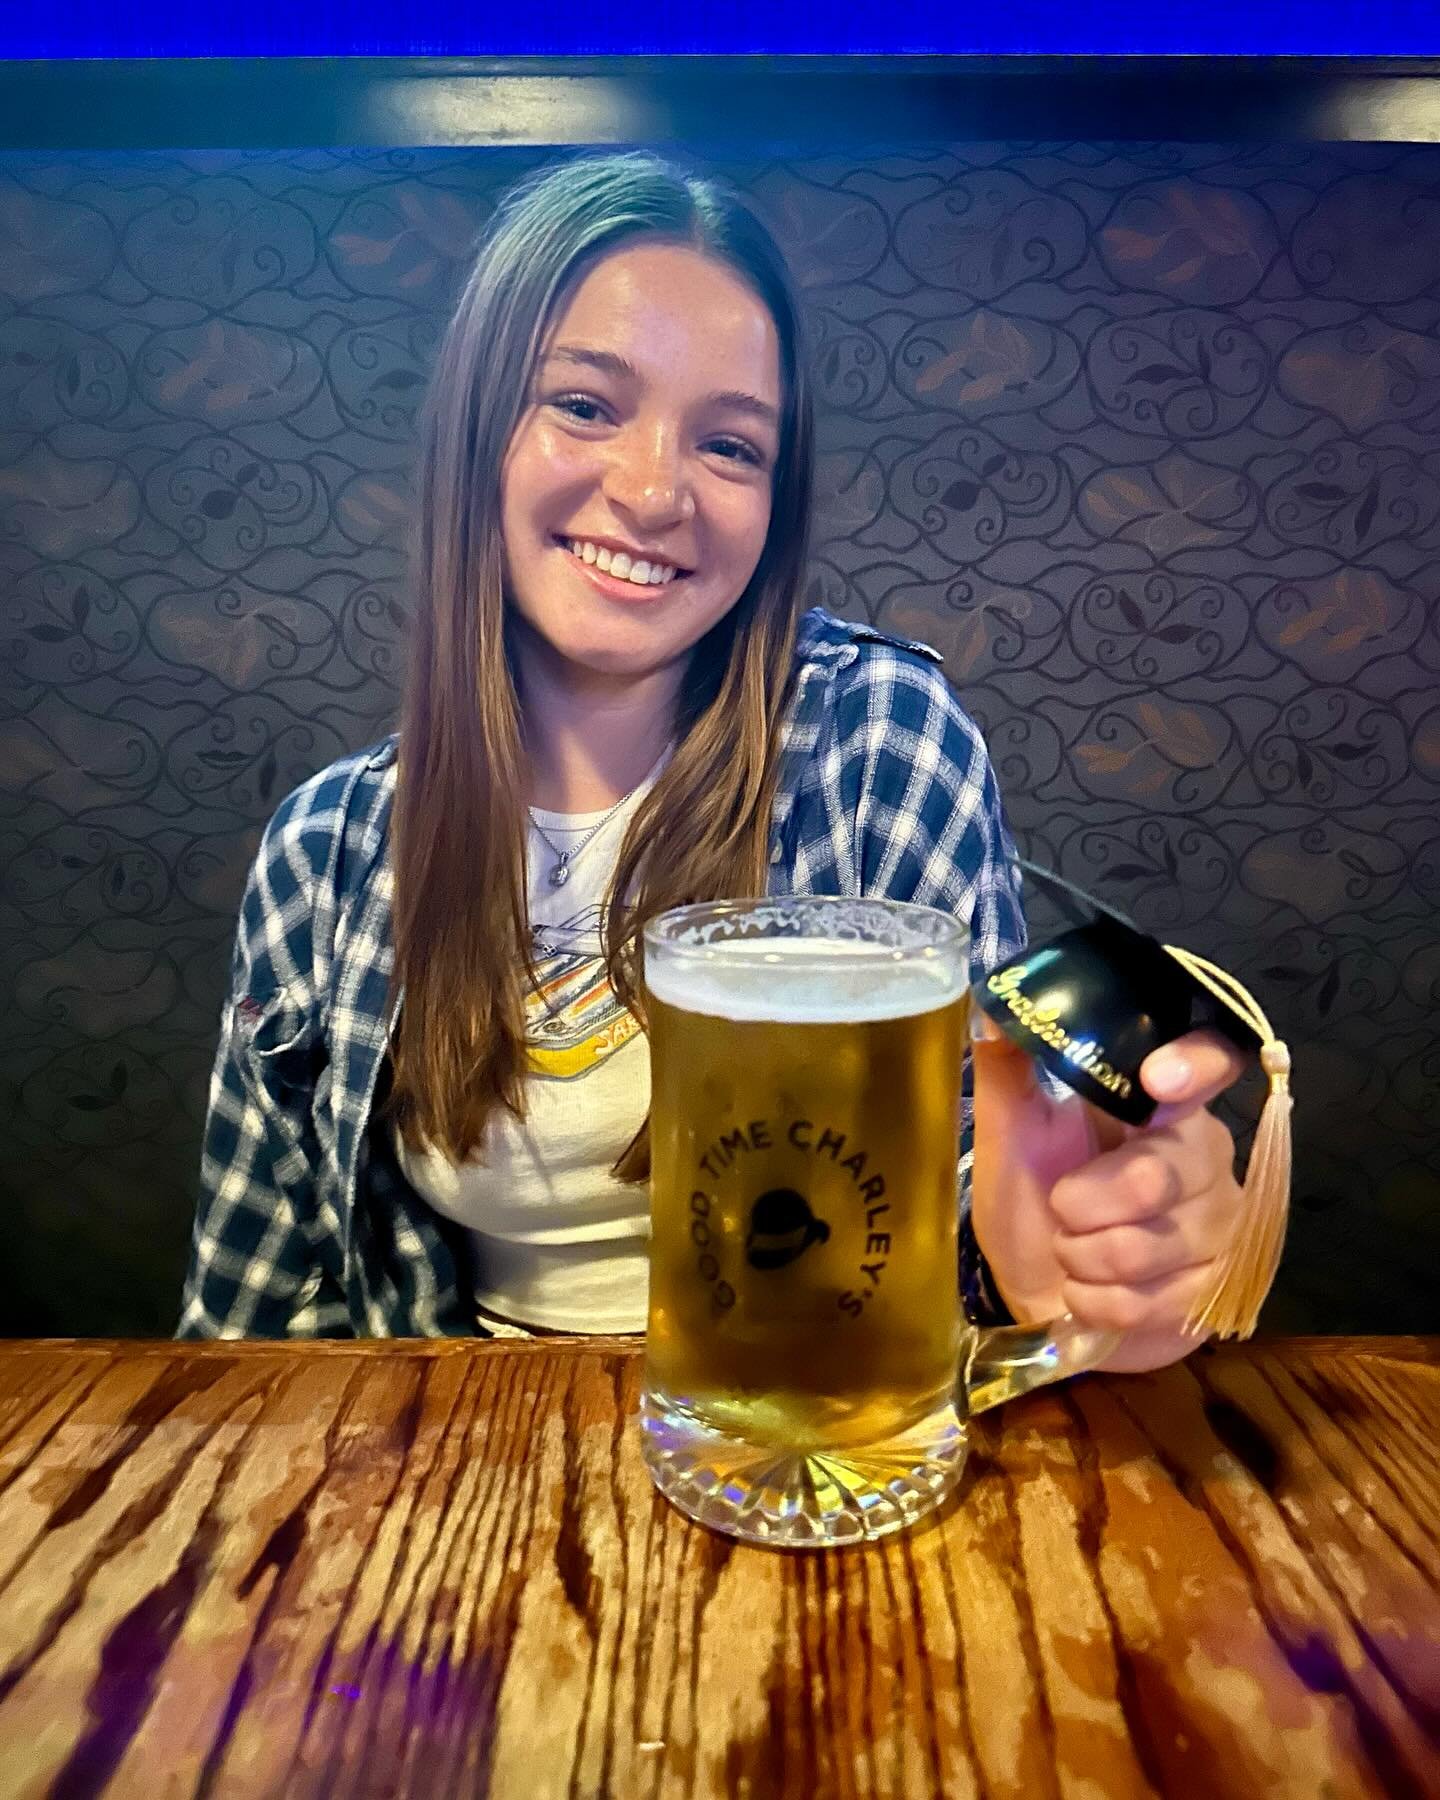 Our Mug Crush this week is✨Kirsten✨ graduation edition. 🎓

Kirsten is an avid Monday Mug Club member who is always filling her cup with Angry Orchard. She is graduating with a degree in chemical engineering and making her way to Wisconsin to work fo